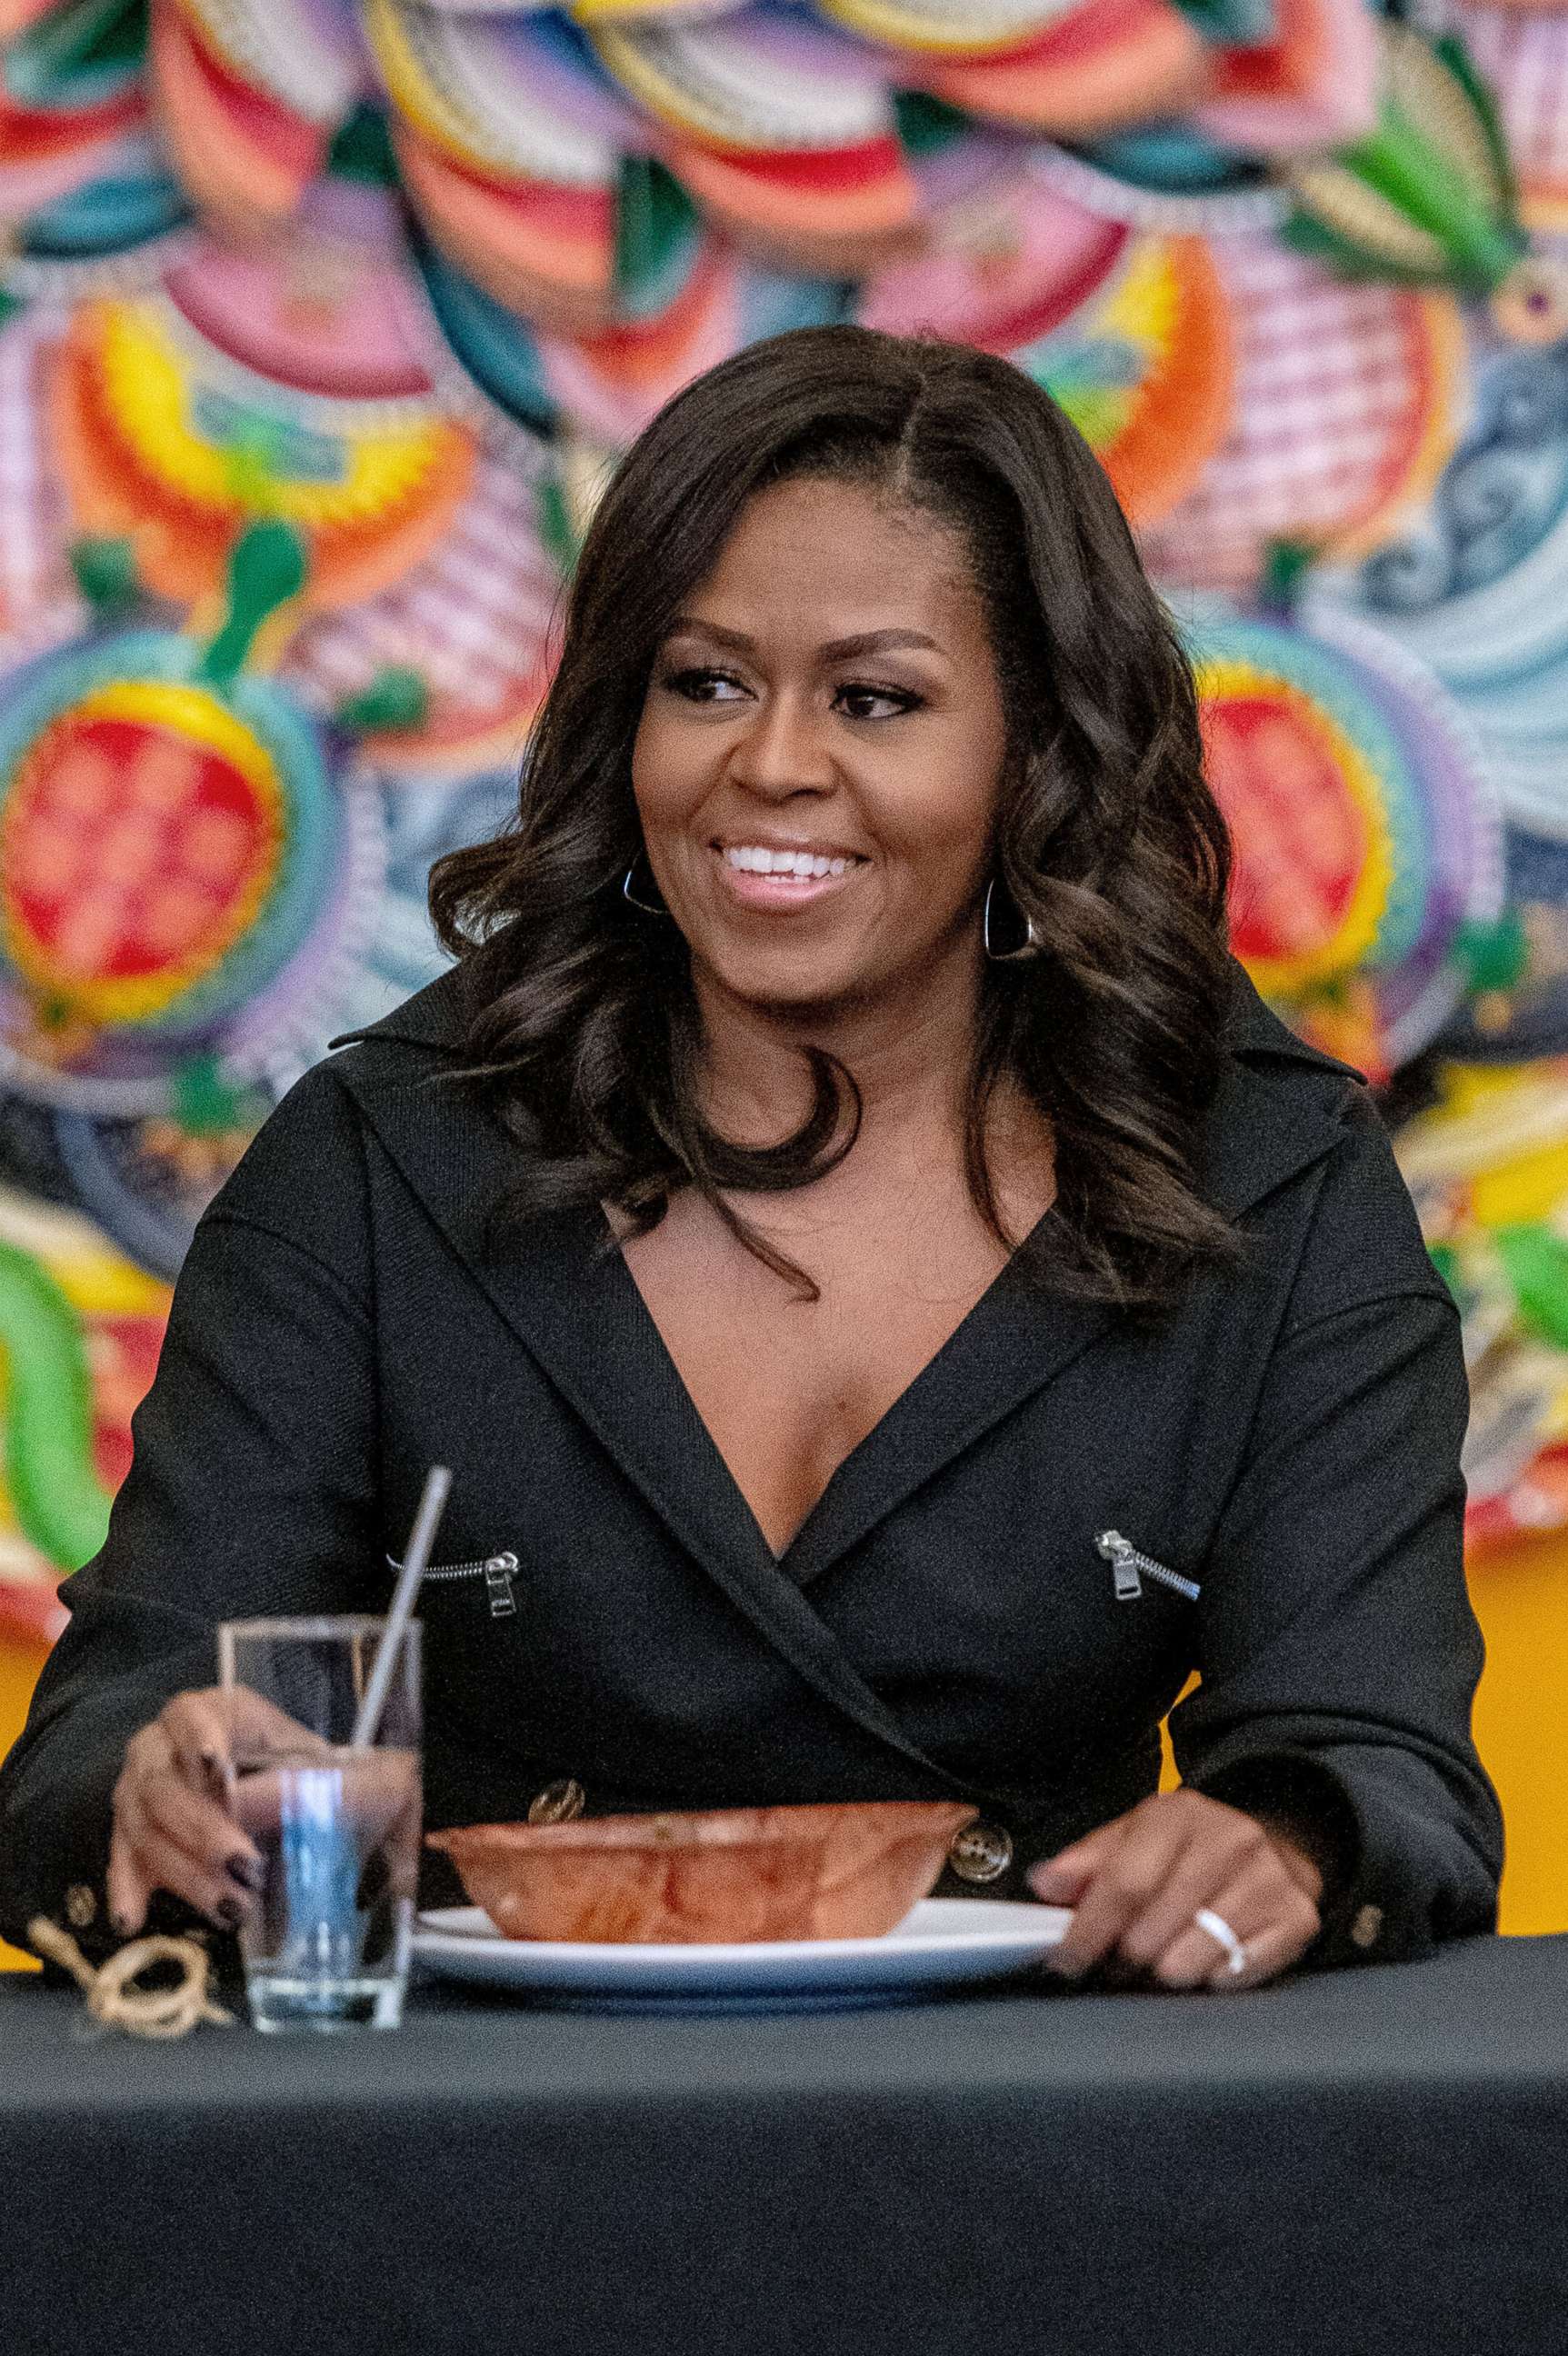 PHOTO: Former first lady Michelle Obama visits The Lower Eastside Girls Club to discuss her new book "Becoming" on Dec. 1, 2018 in New York City.